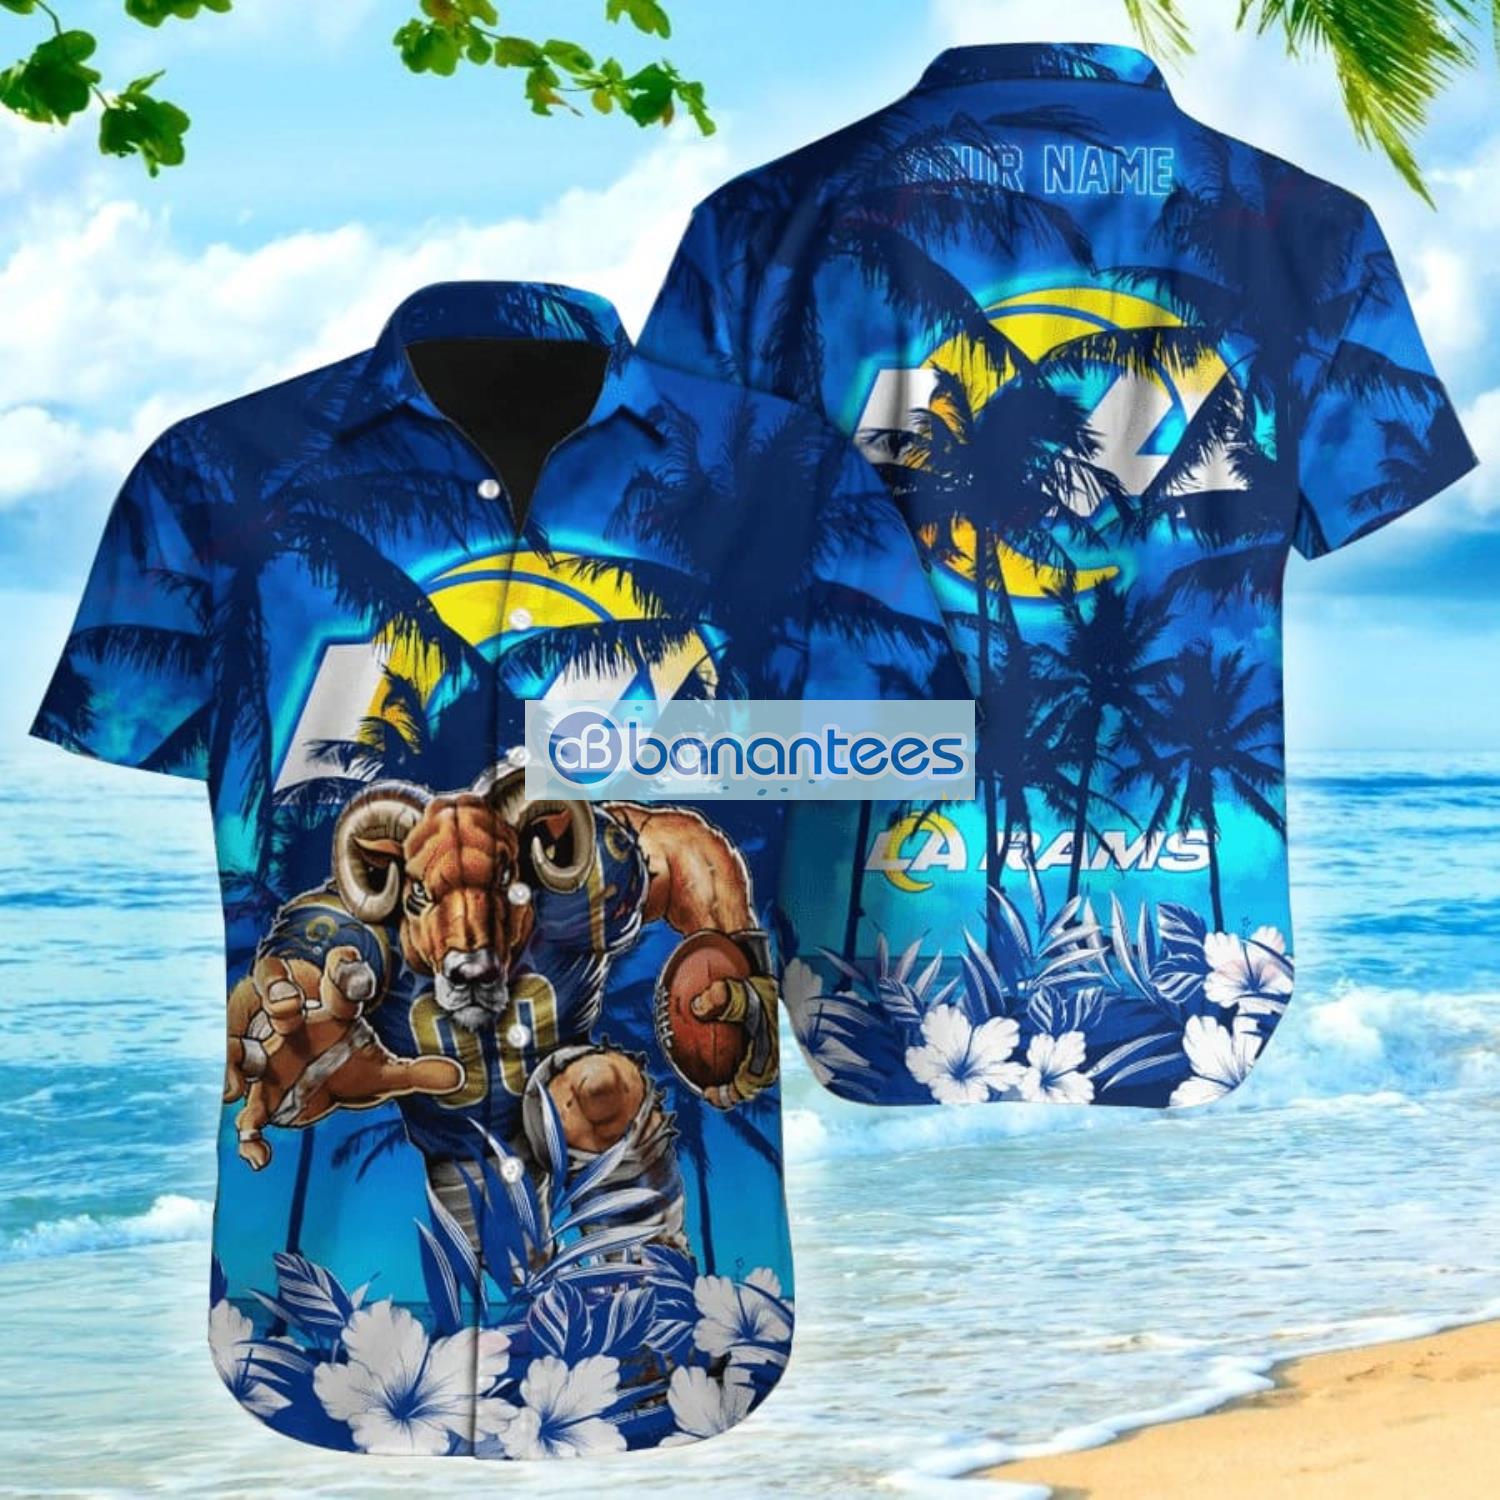 Los Angeles Rams NFL Graphic Tropical Pattern Style Summer 3D